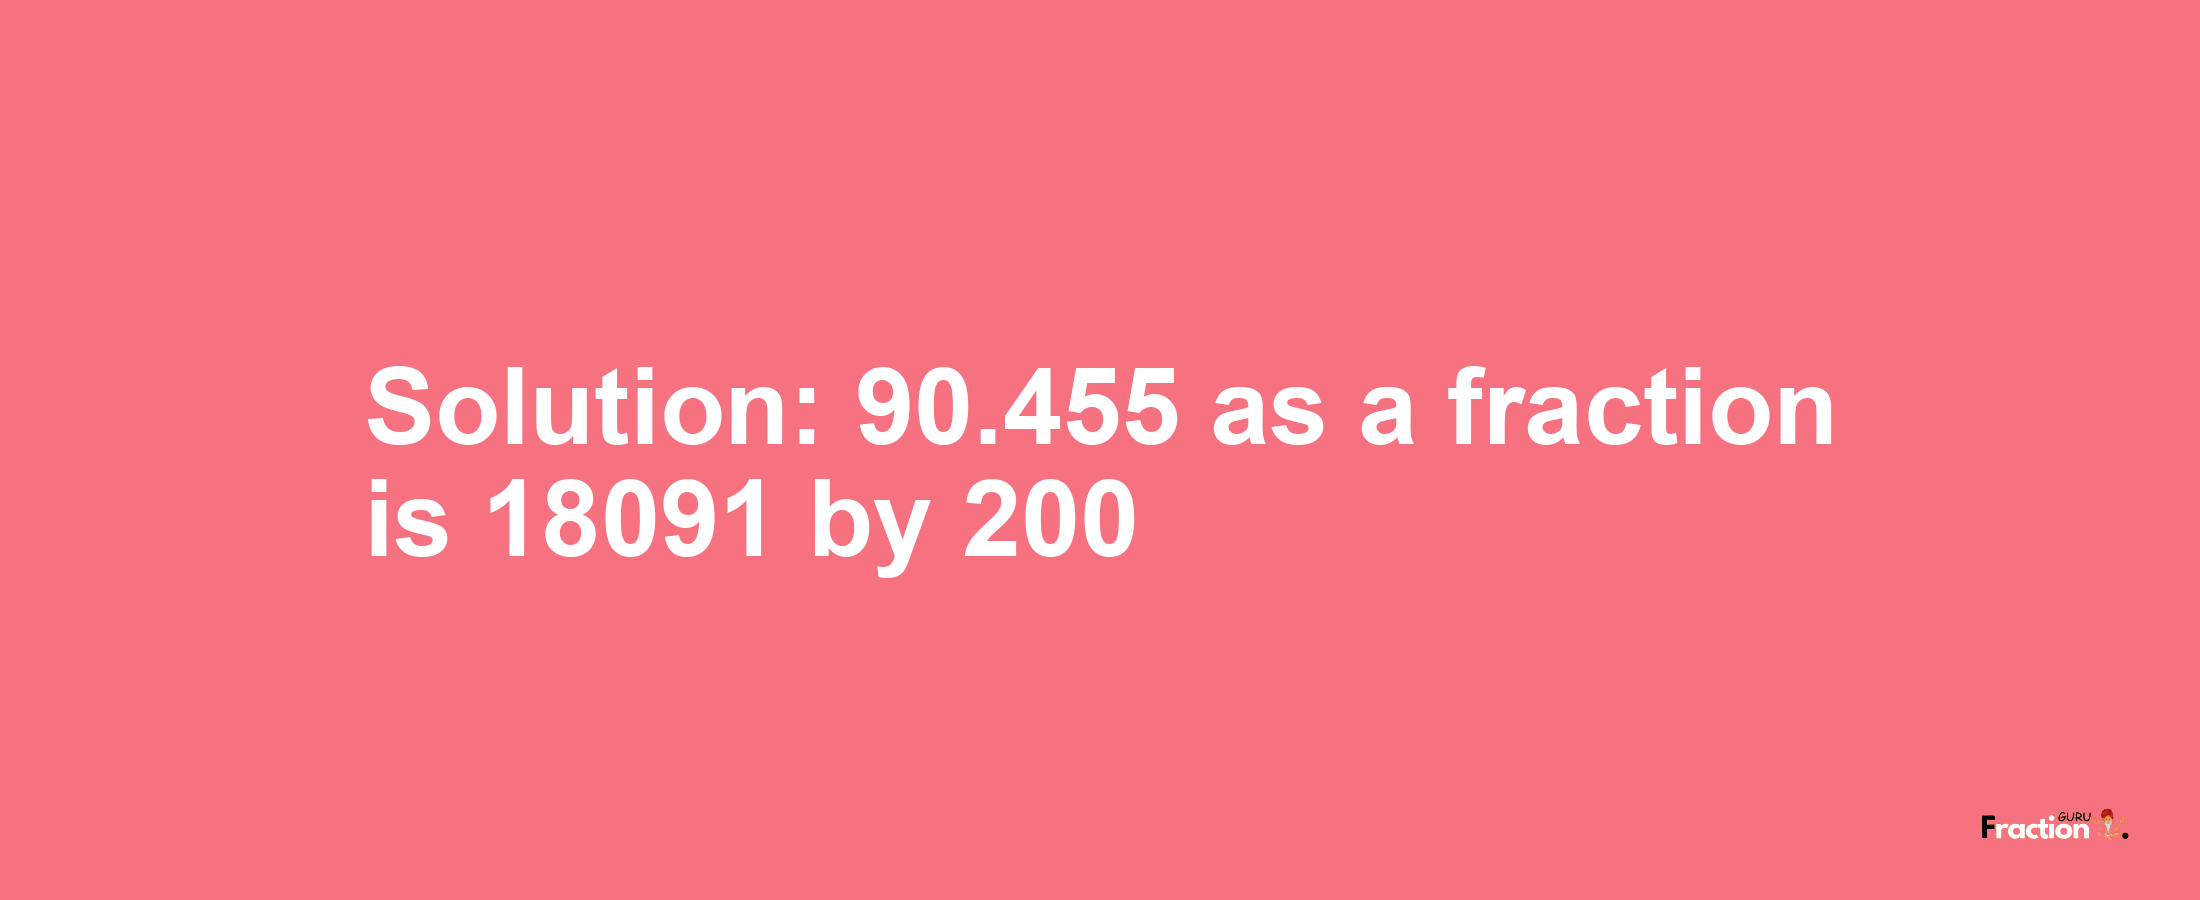 Solution:90.455 as a fraction is 18091/200